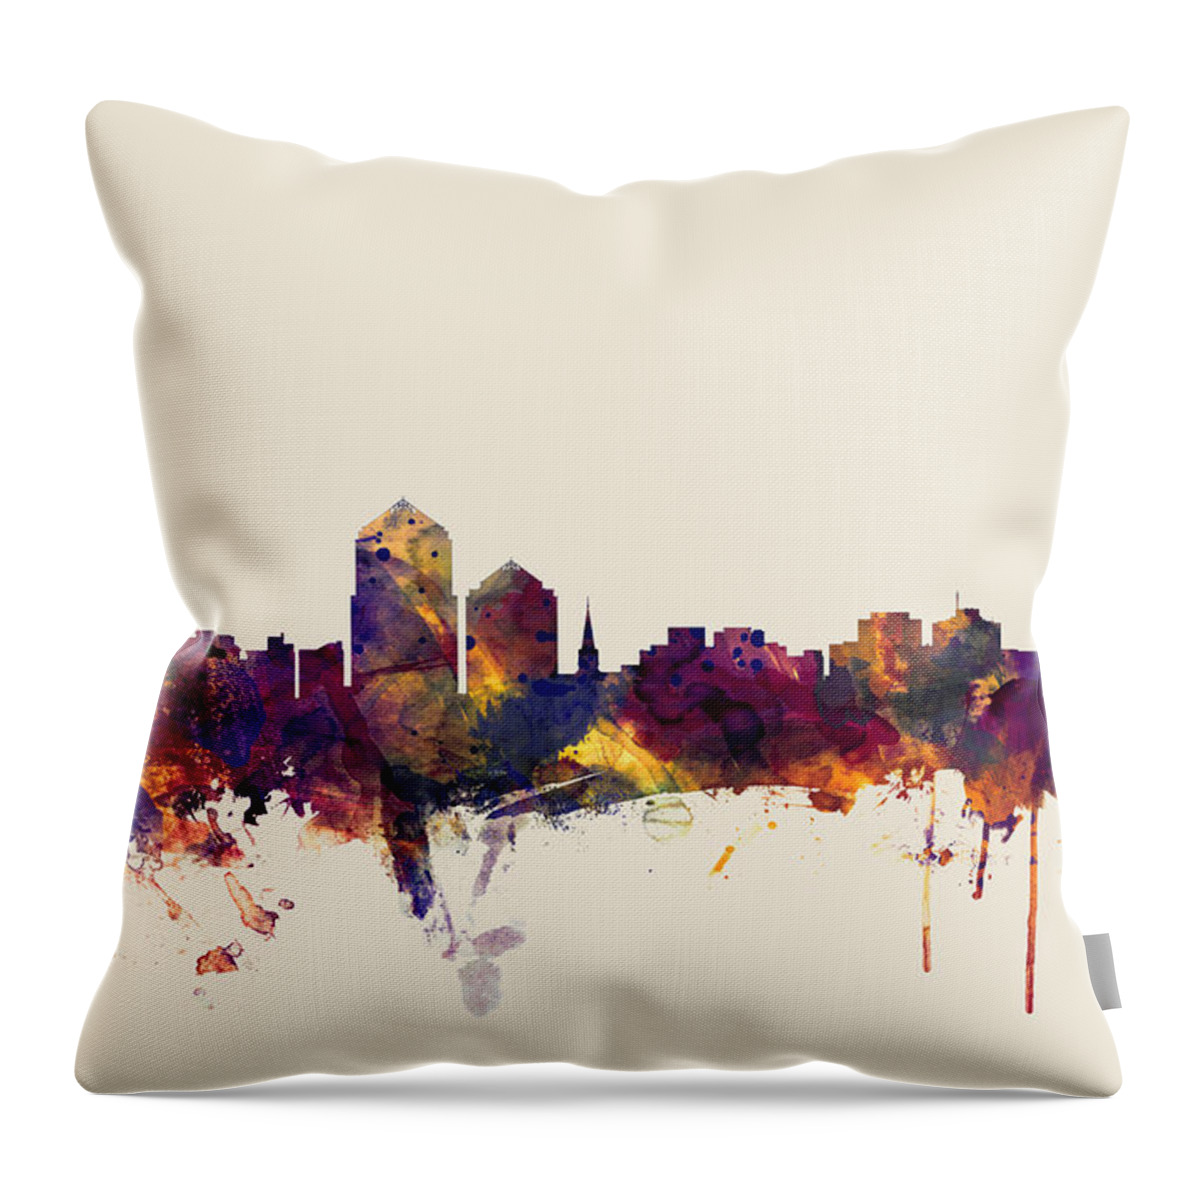 United States Throw Pillow featuring the digital art Albuquerque New Mexico Skyline #4 by Michael Tompsett